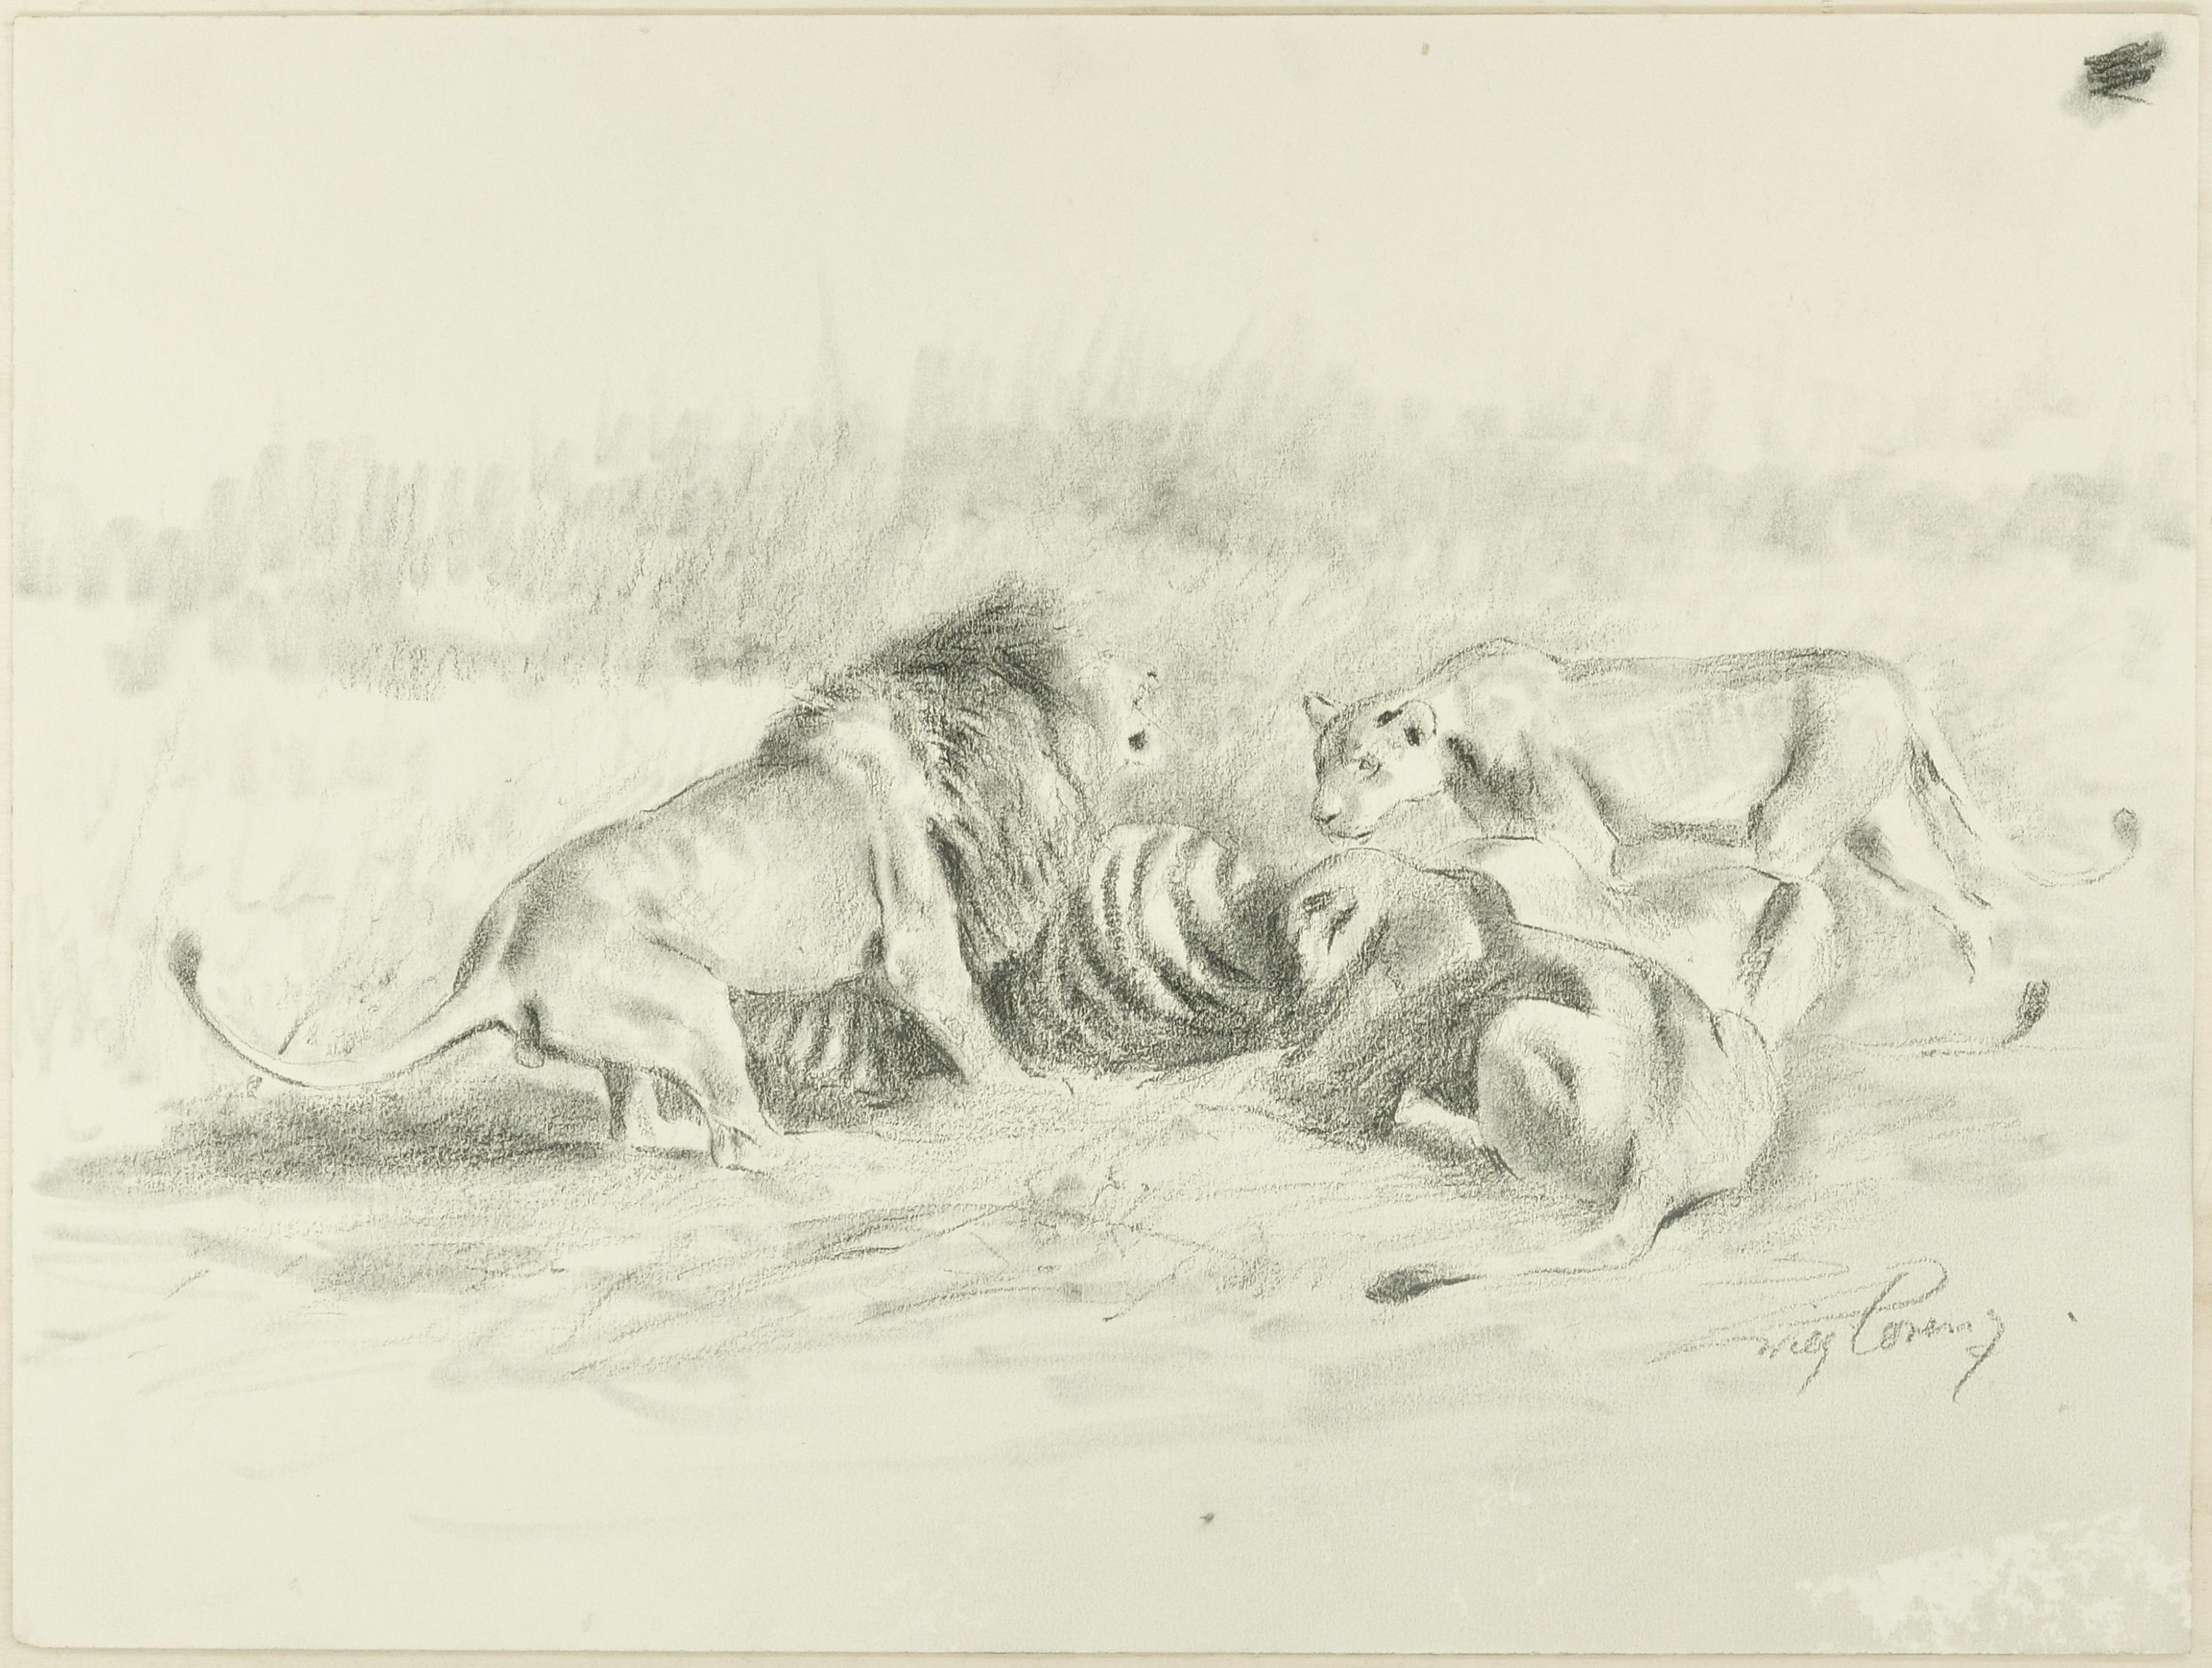 After the Hunt - Original Pencil Drawing by Willy Lorenz - 1950s